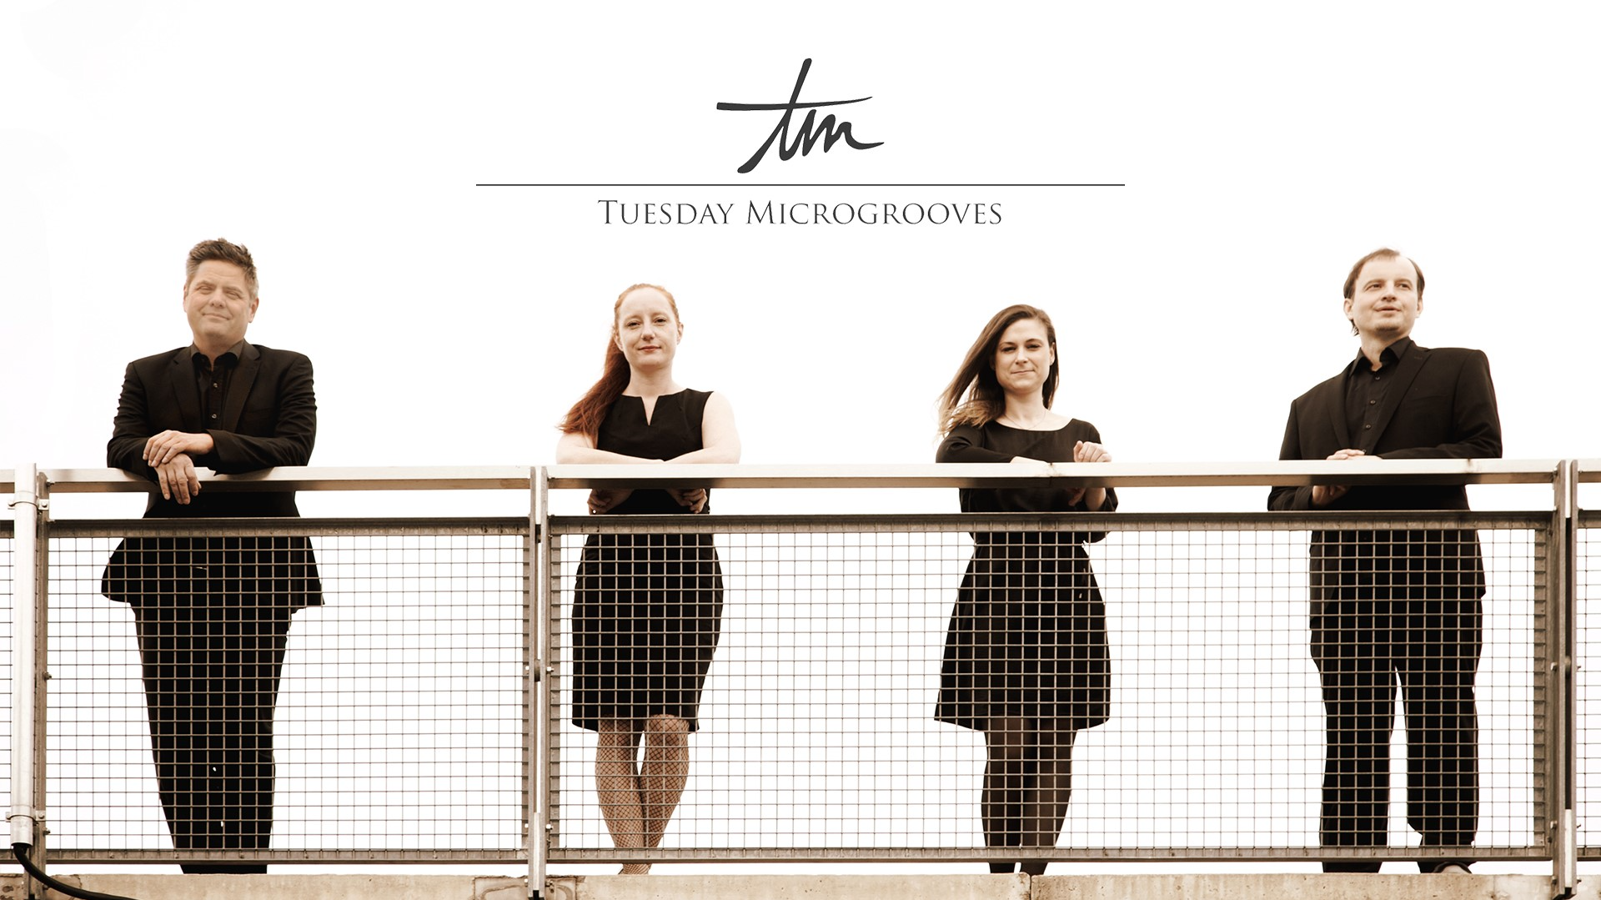 Tuesday Microgrooves